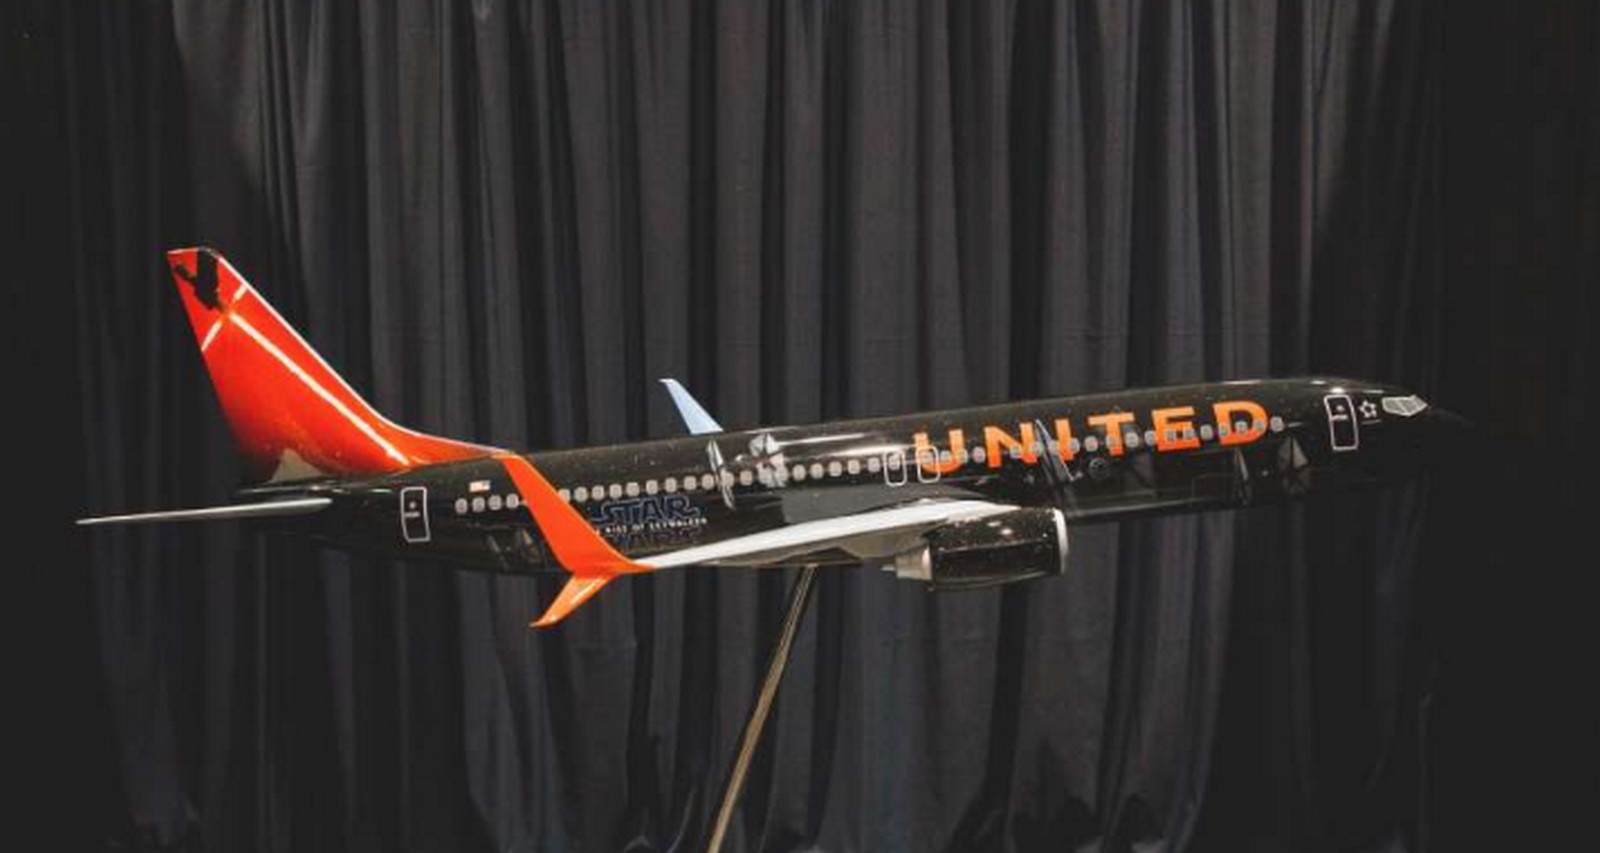 United Star Wars Livery Coming This Fall